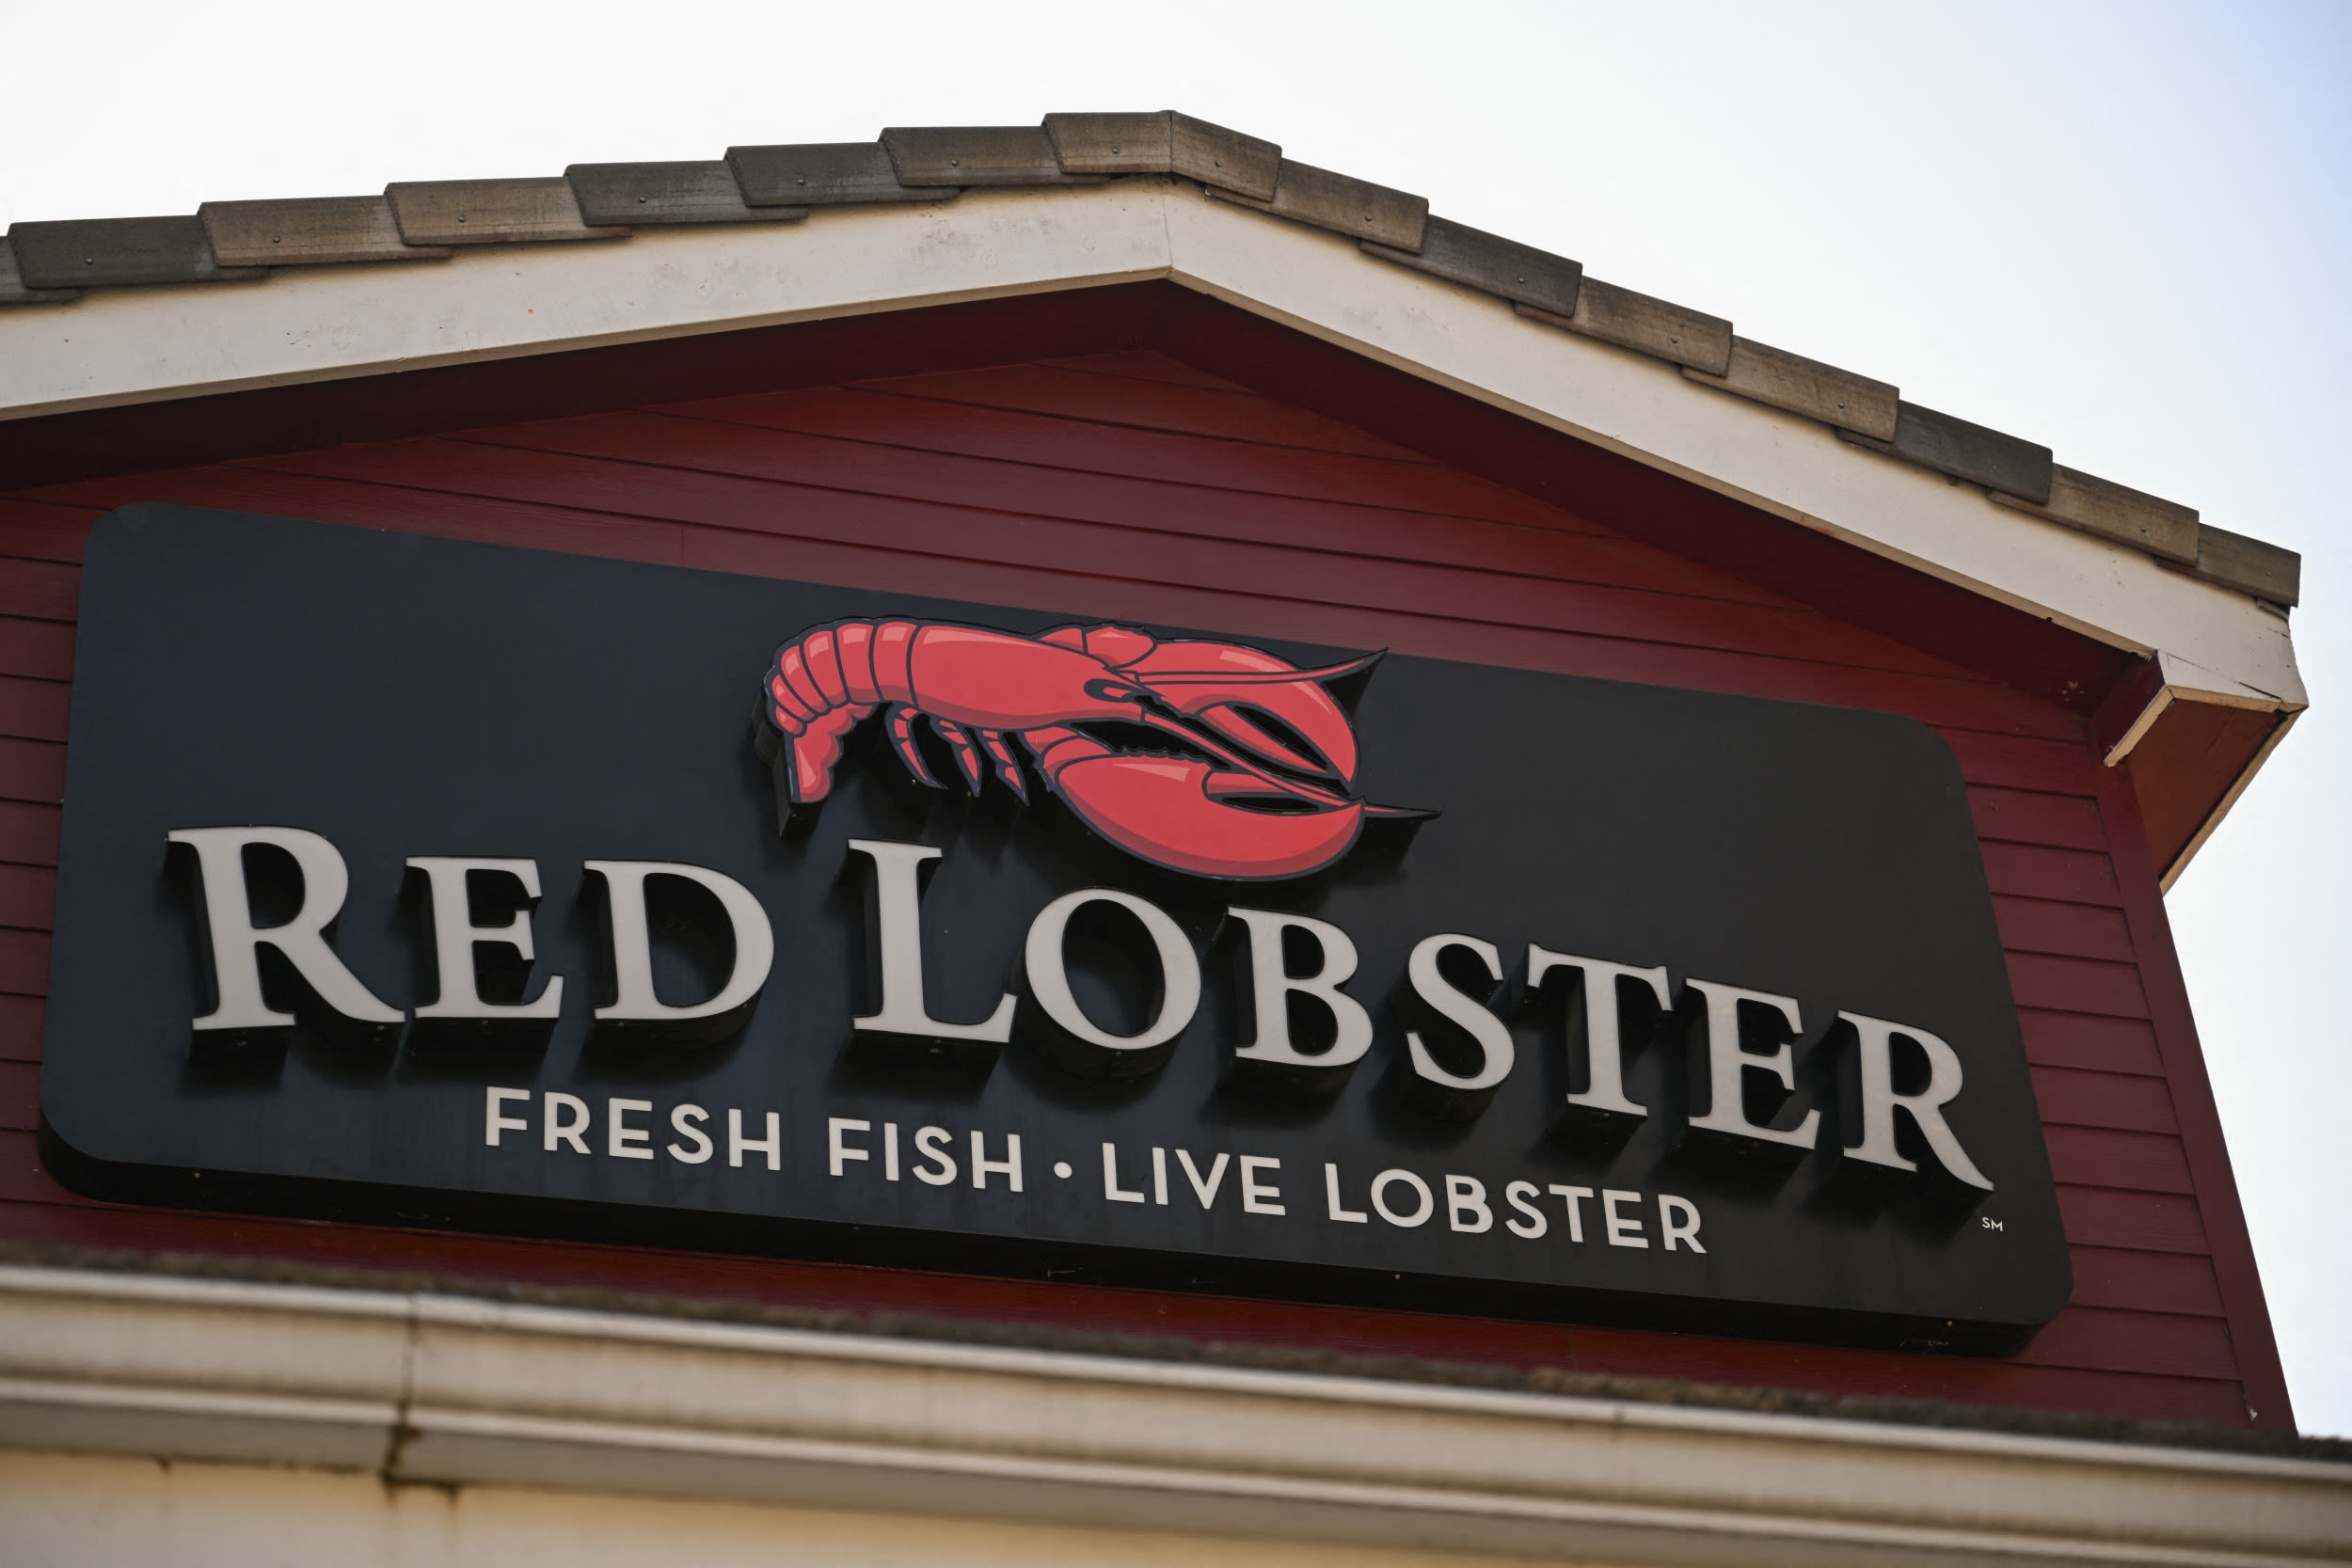 Red Lobster restaurant sale launches—"Entire contents" from $1,600